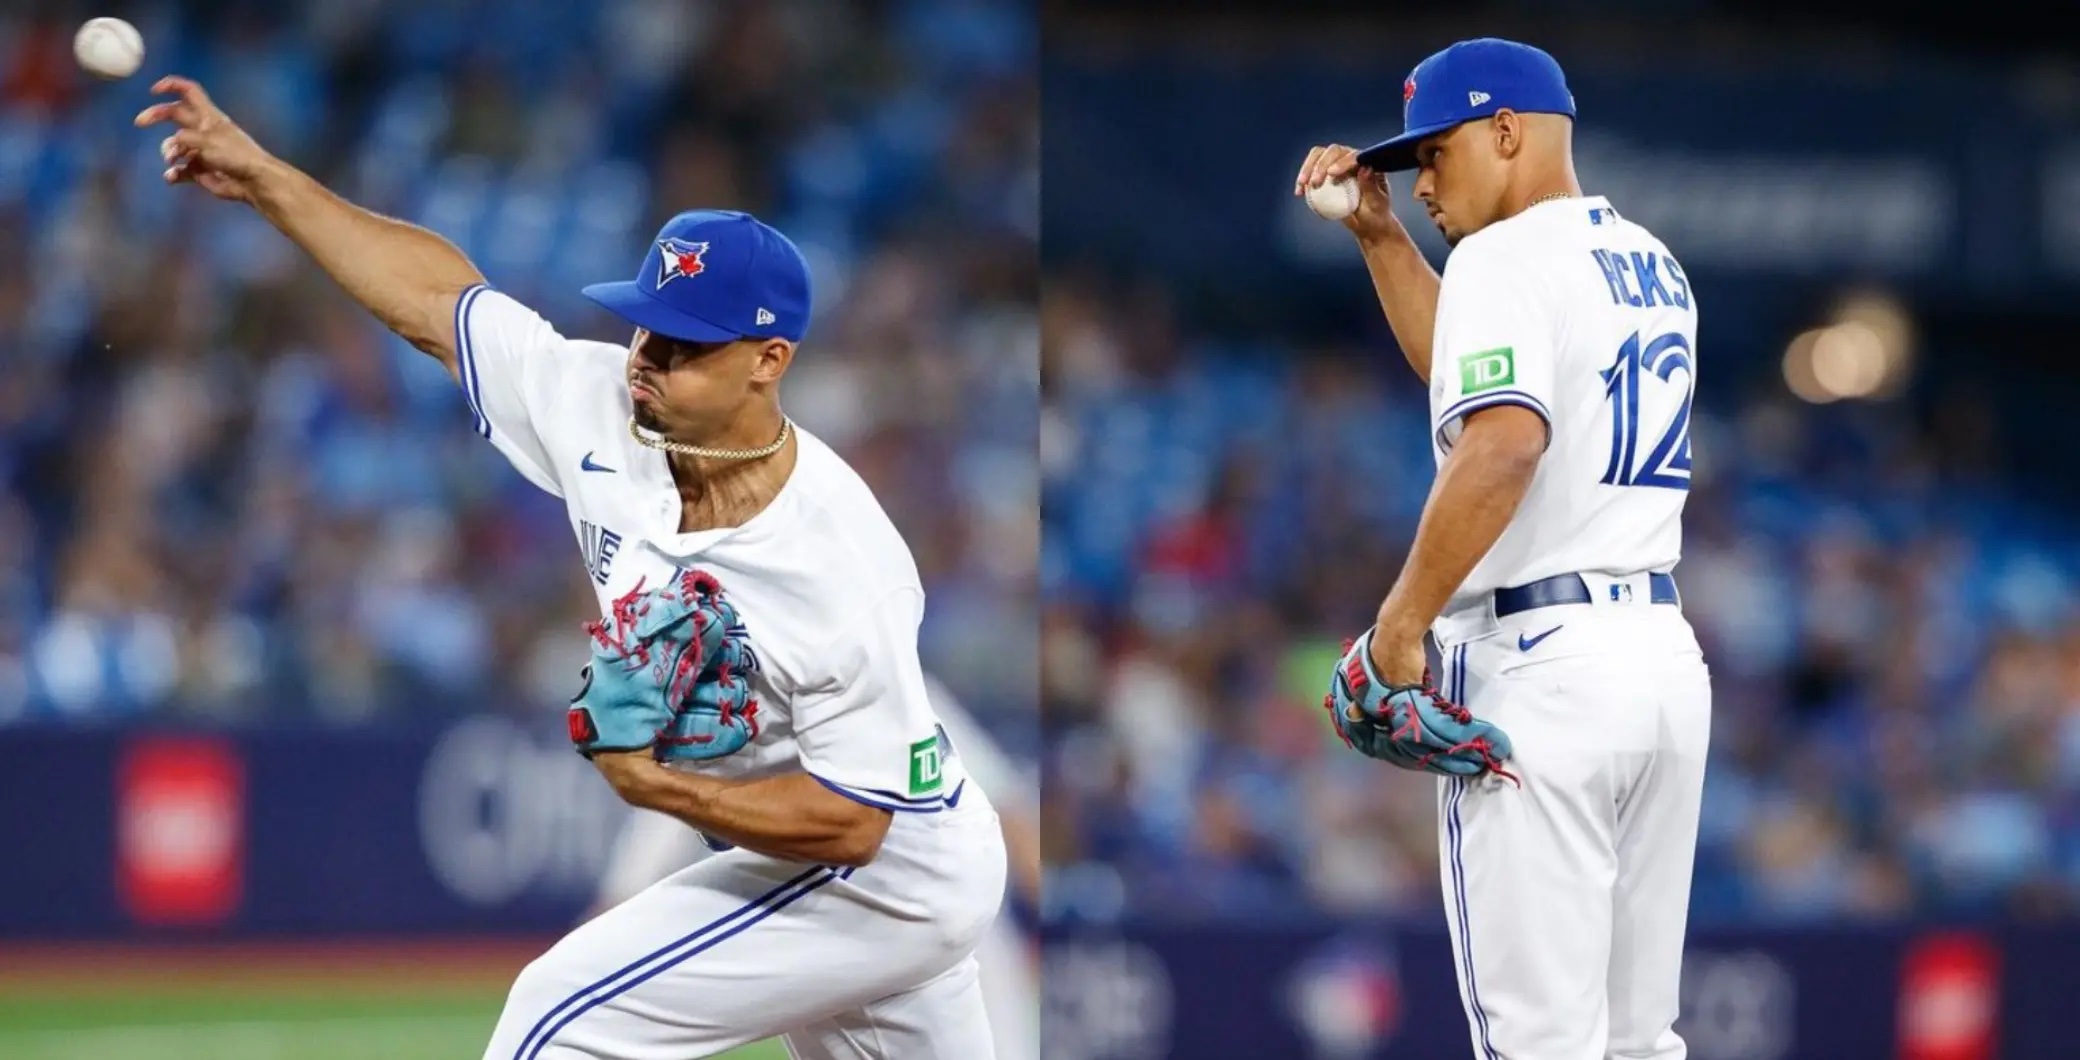 What's next for the Blue Jays after acquiring Jordan Hicks?